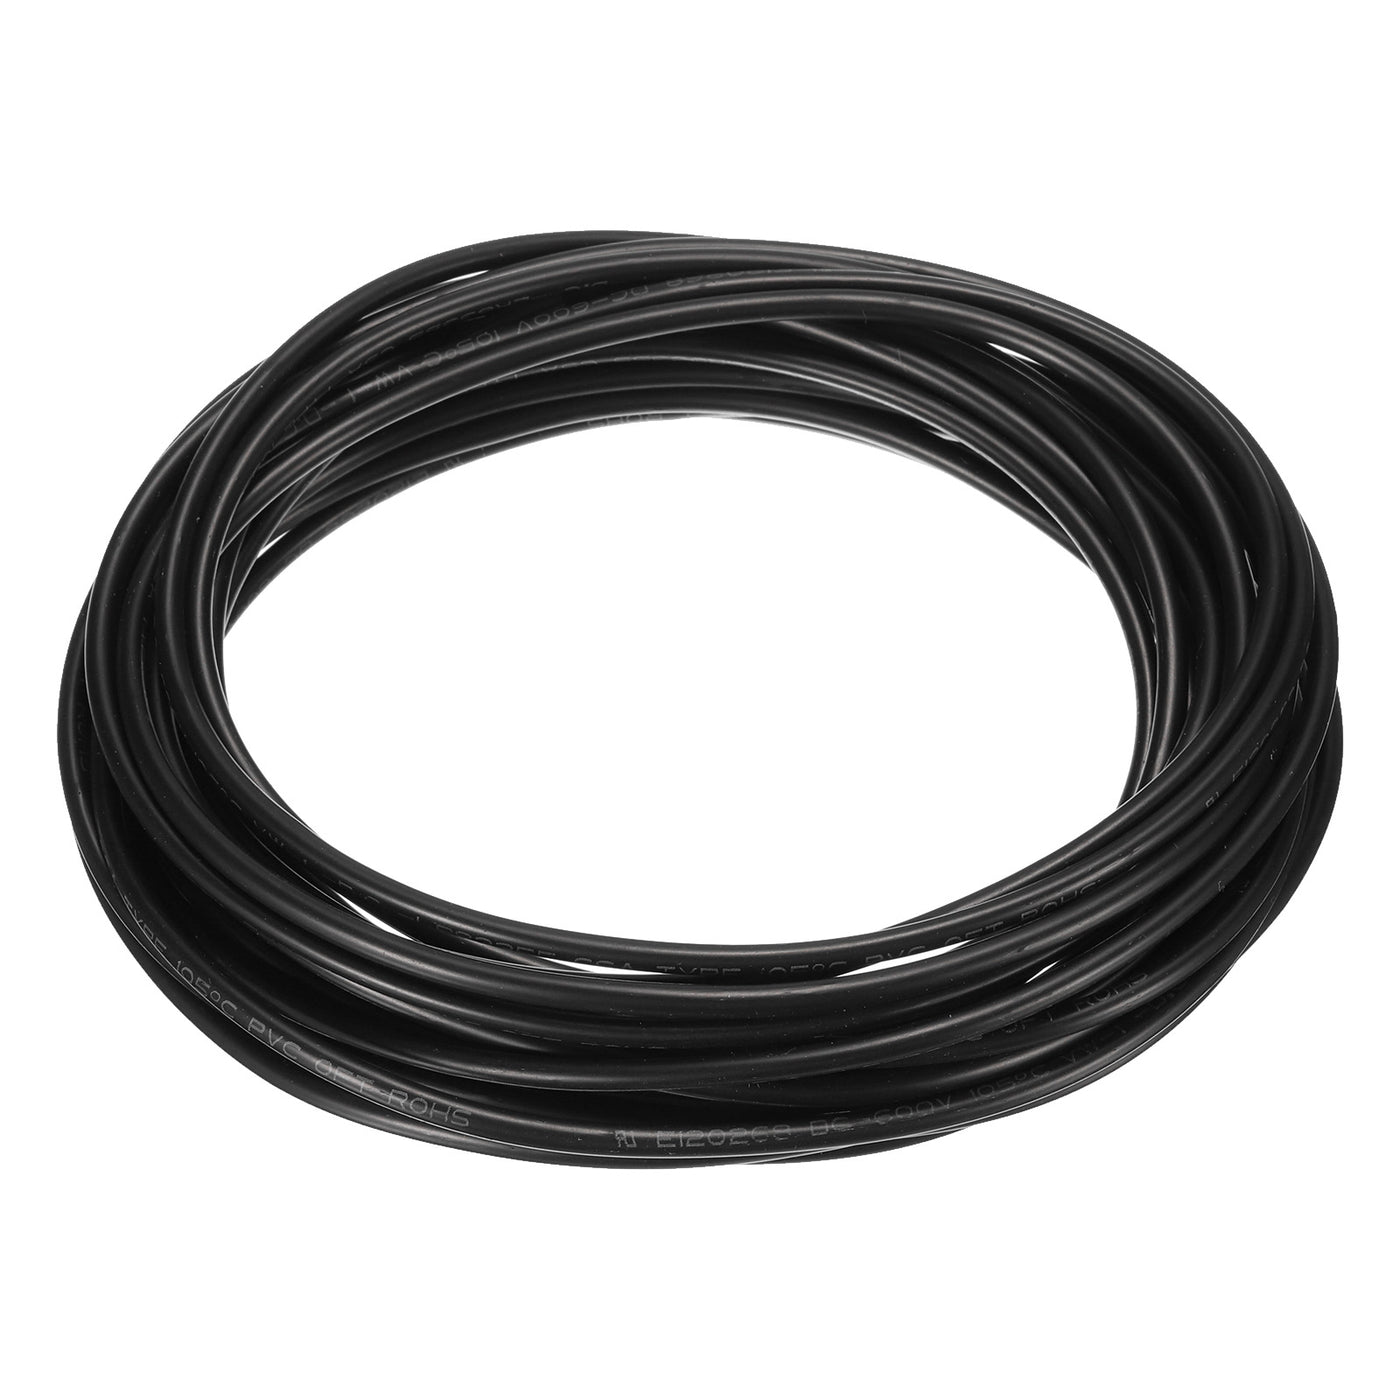 uxcell Uxcell Black PVC Tube Wire Harness Tubing, 2mm ID 10ft Sleeve for Wire Sheathing Wire Protection